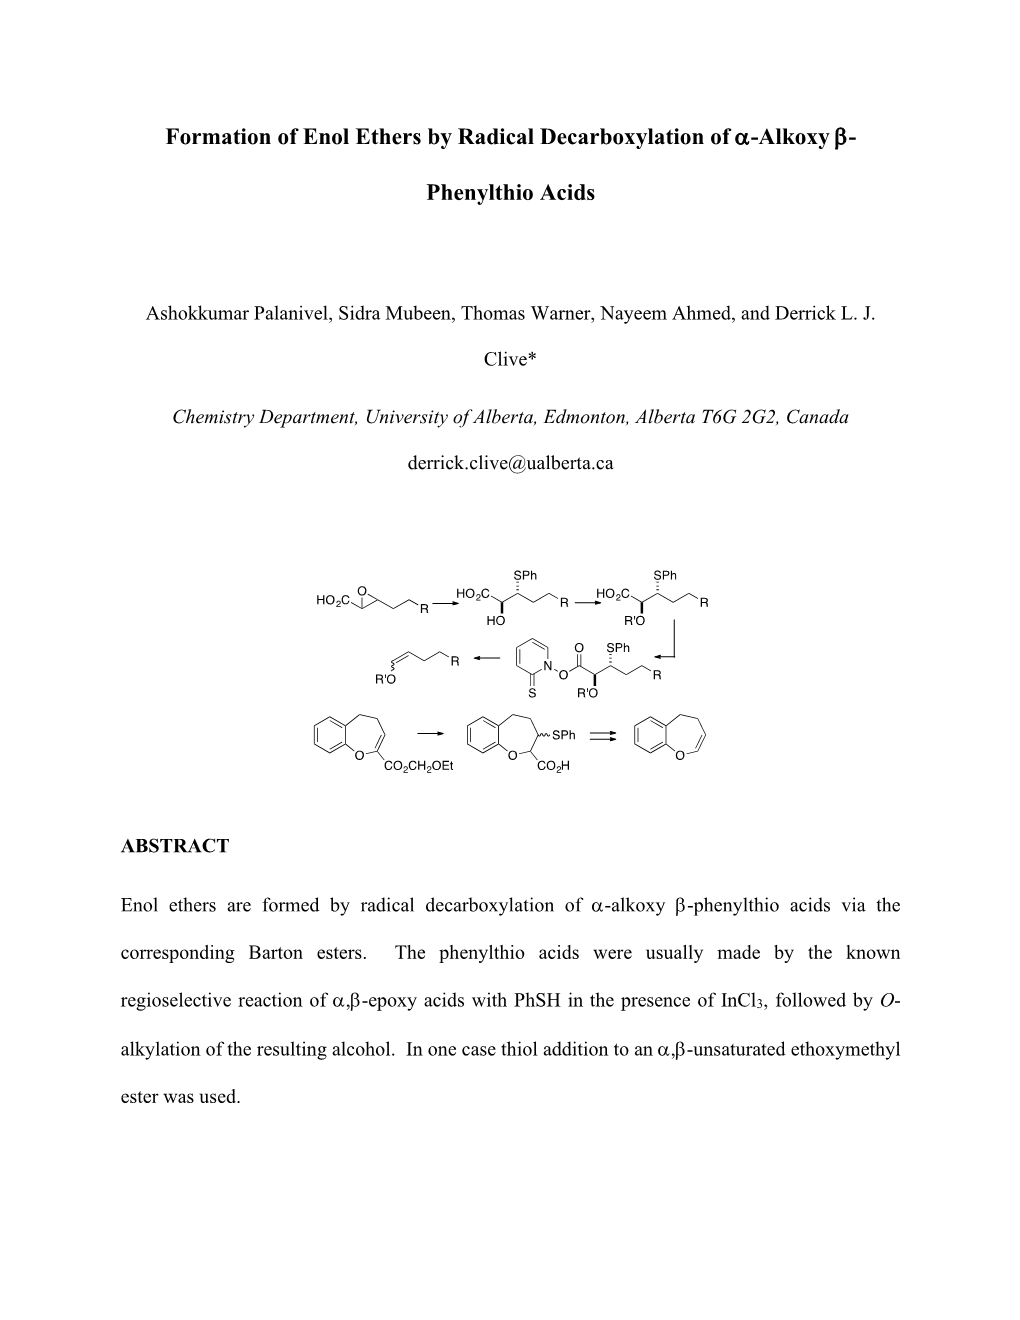 Formation of Enol Ethers by Radical Decarboxylation of Α-Alkoxy Β